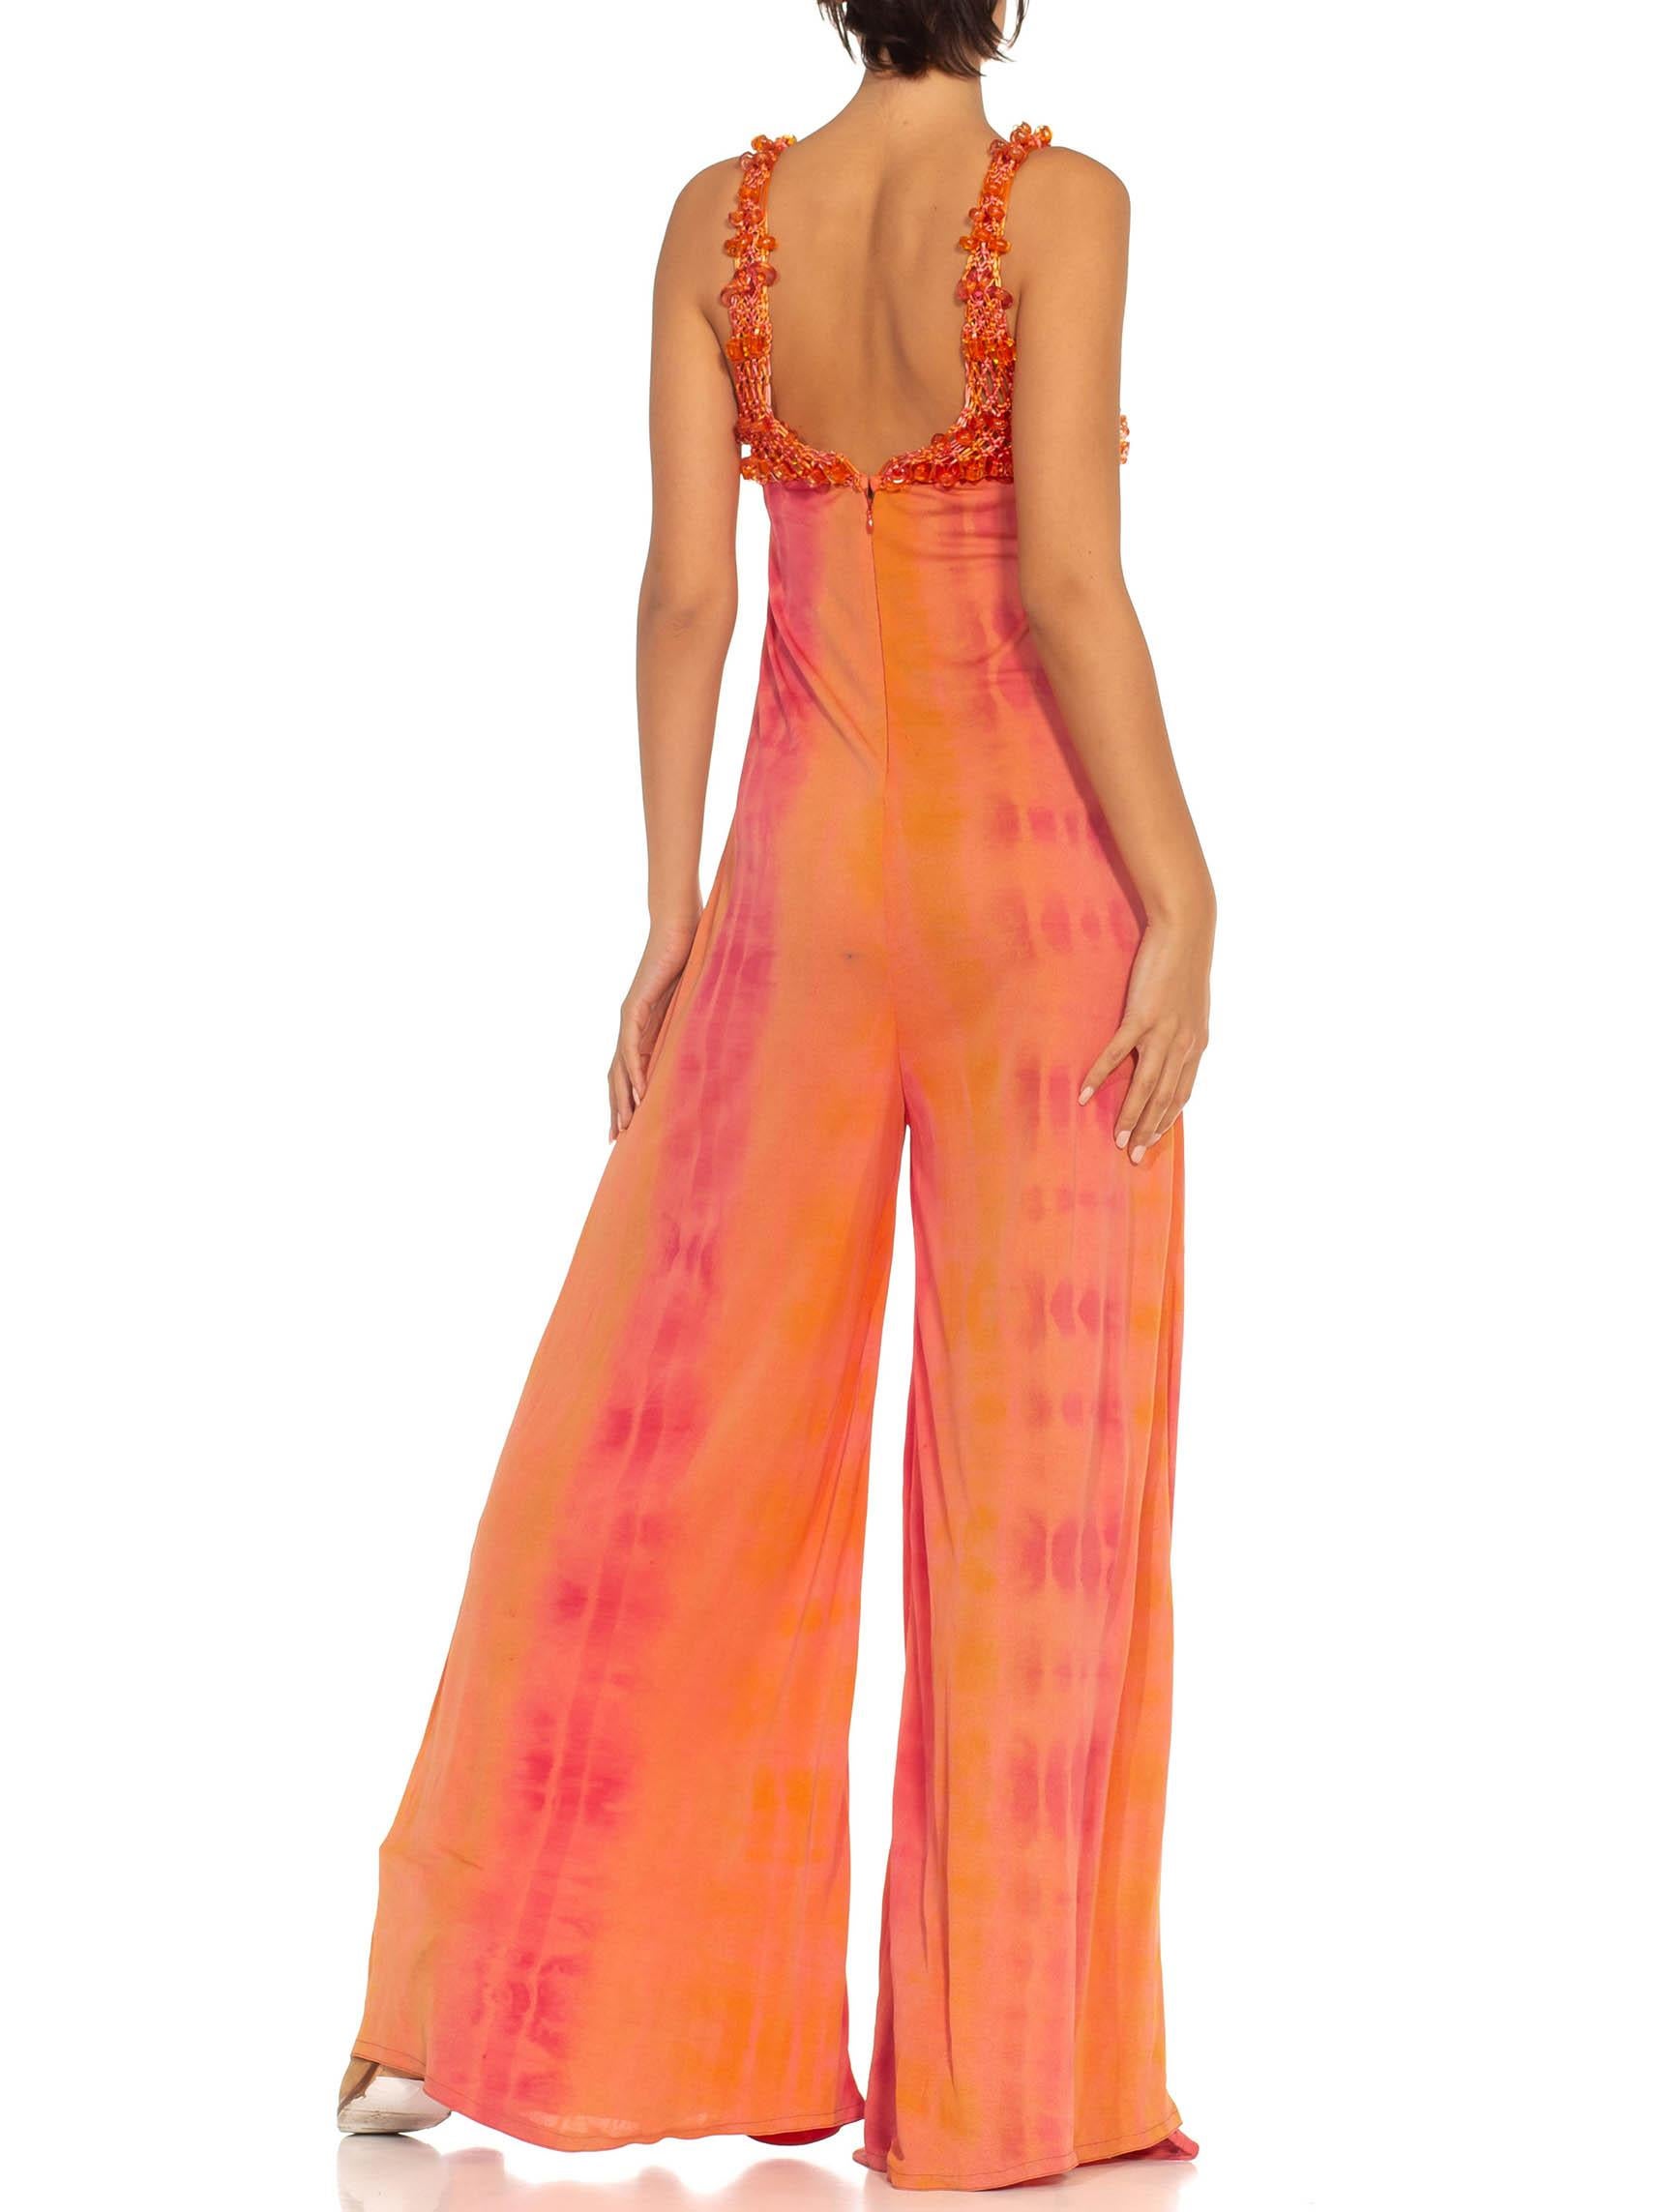 2000S Orange Peach Poly Blend Jersey Tie Dye Jumpsuit With Crochet Beaded Straps In Excellent Condition For Sale In New York, NY